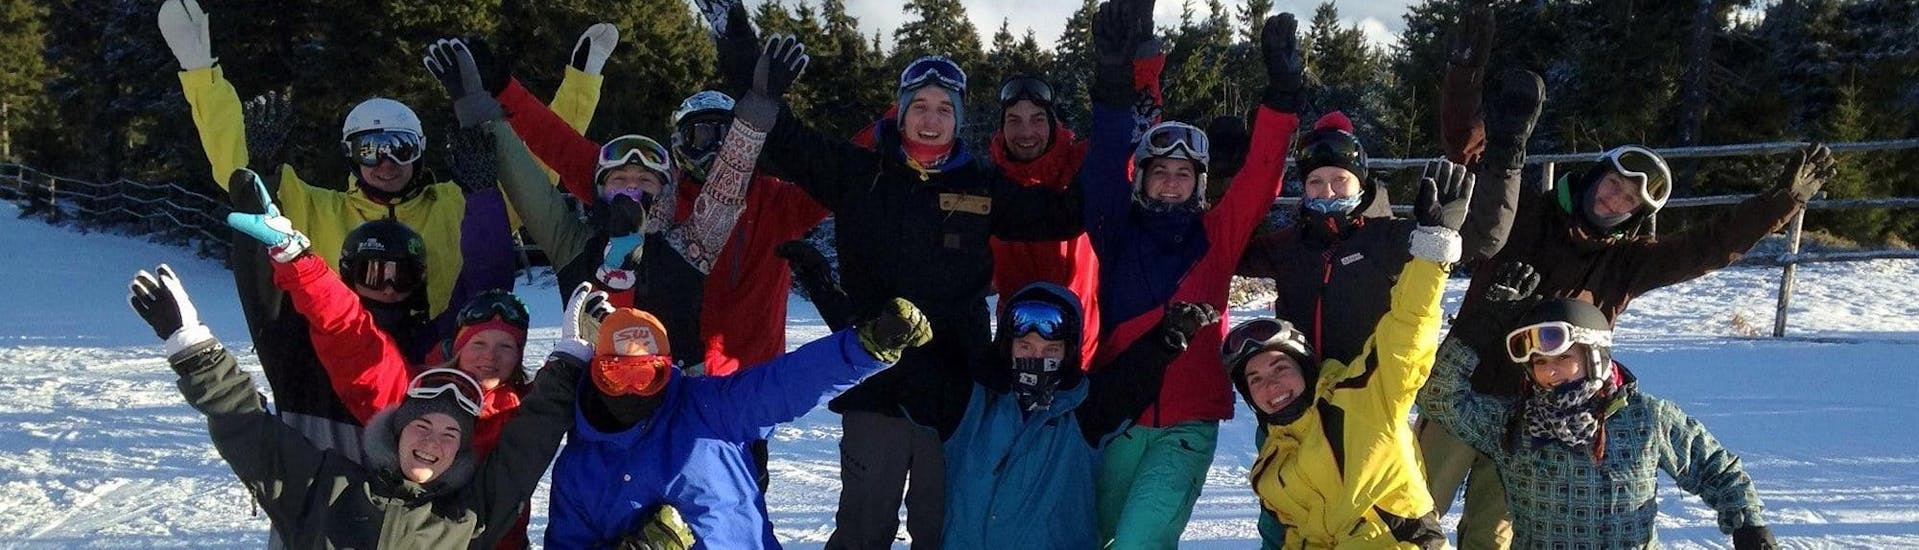 Snowboard Lessons for Adults - Group Lesson.